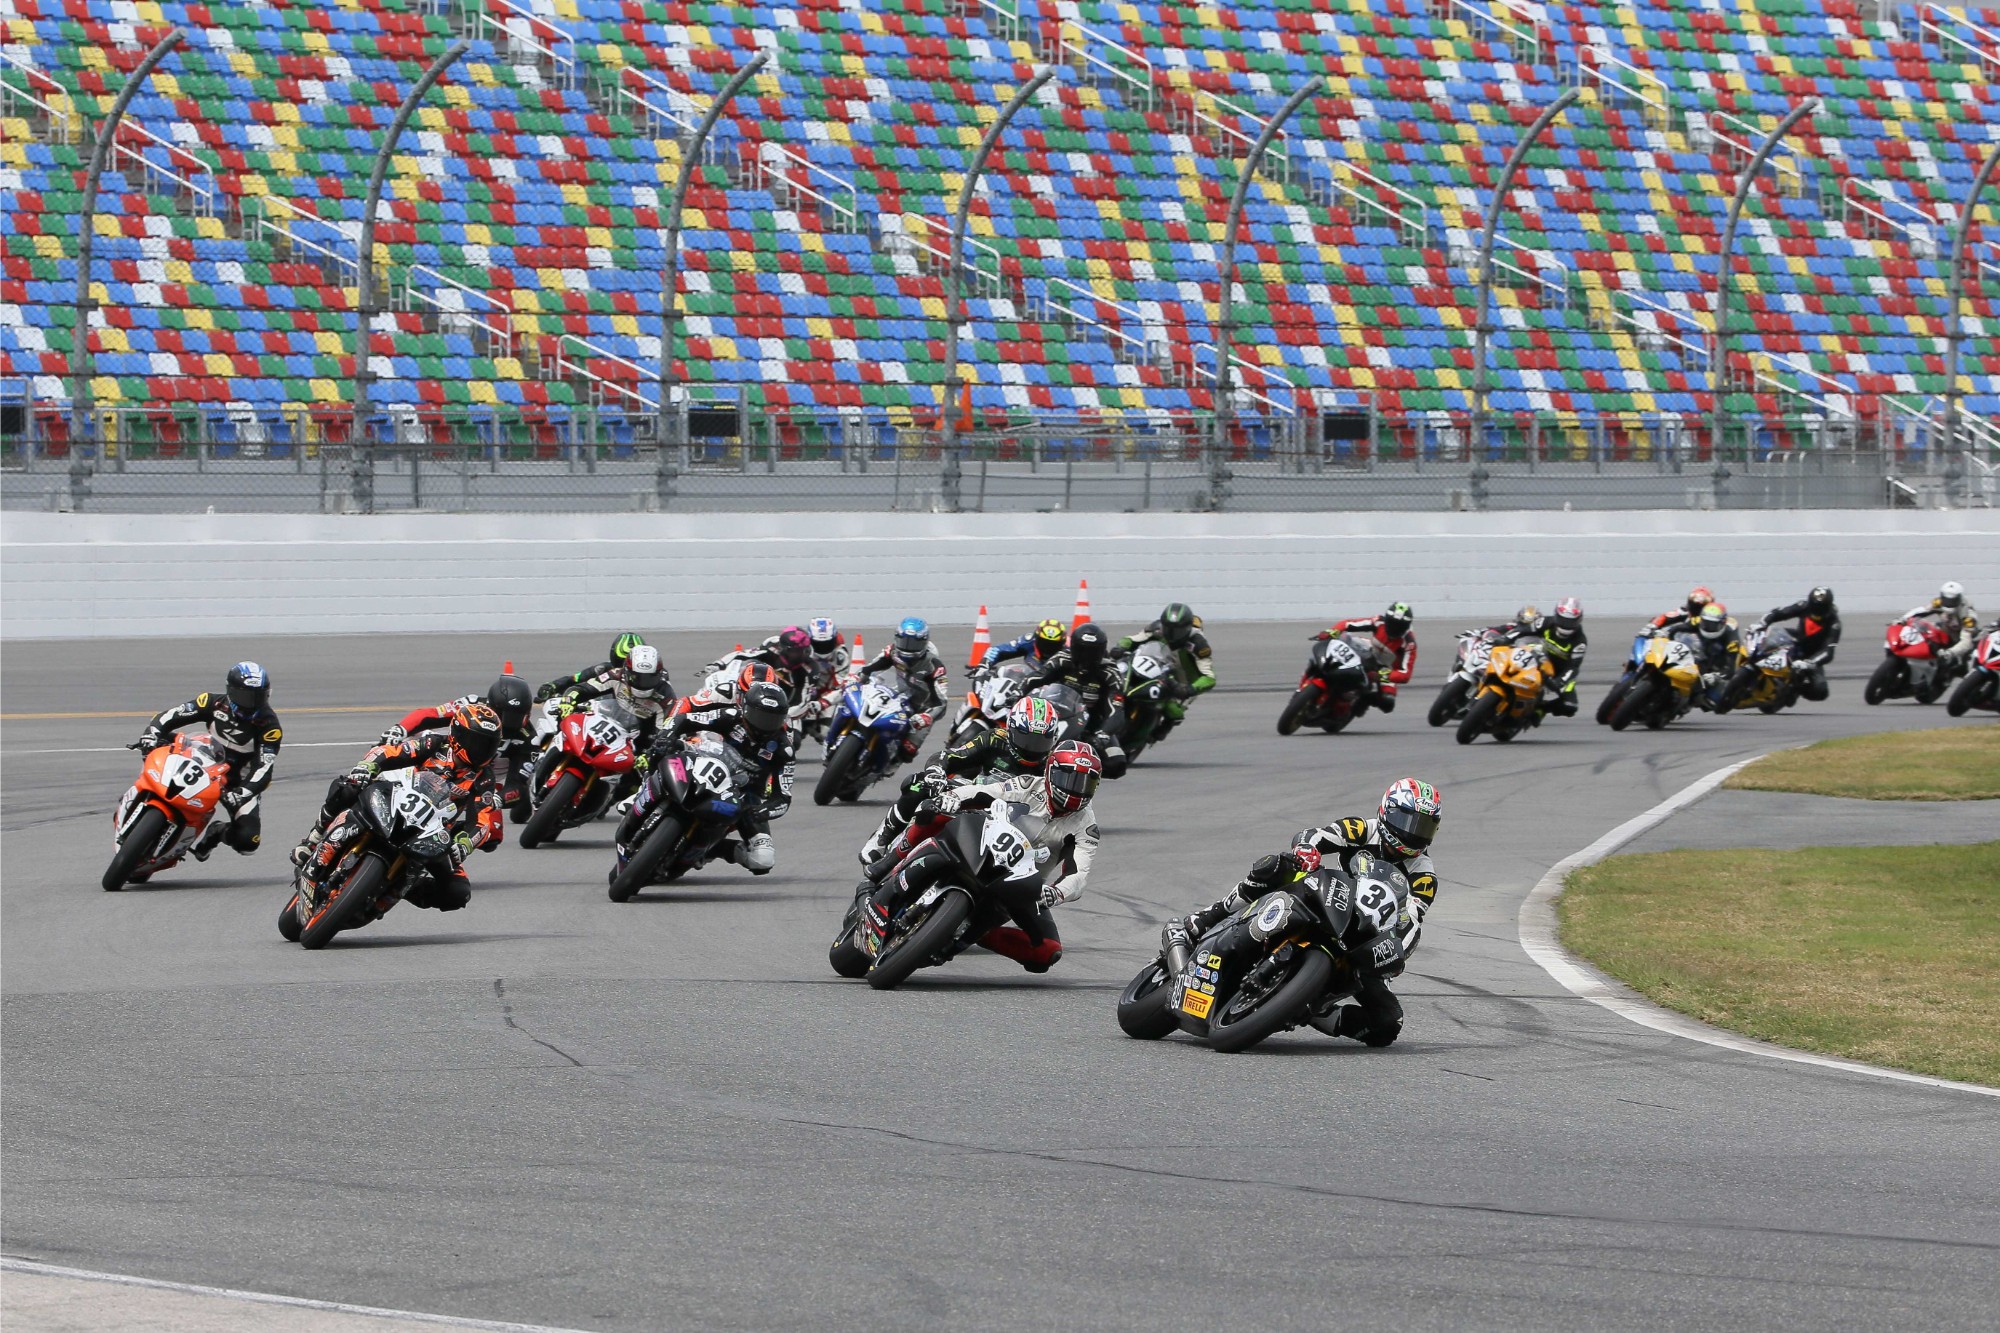 Daytona 200 Race Will Be Streamed Live And At No Charge At FansChoice